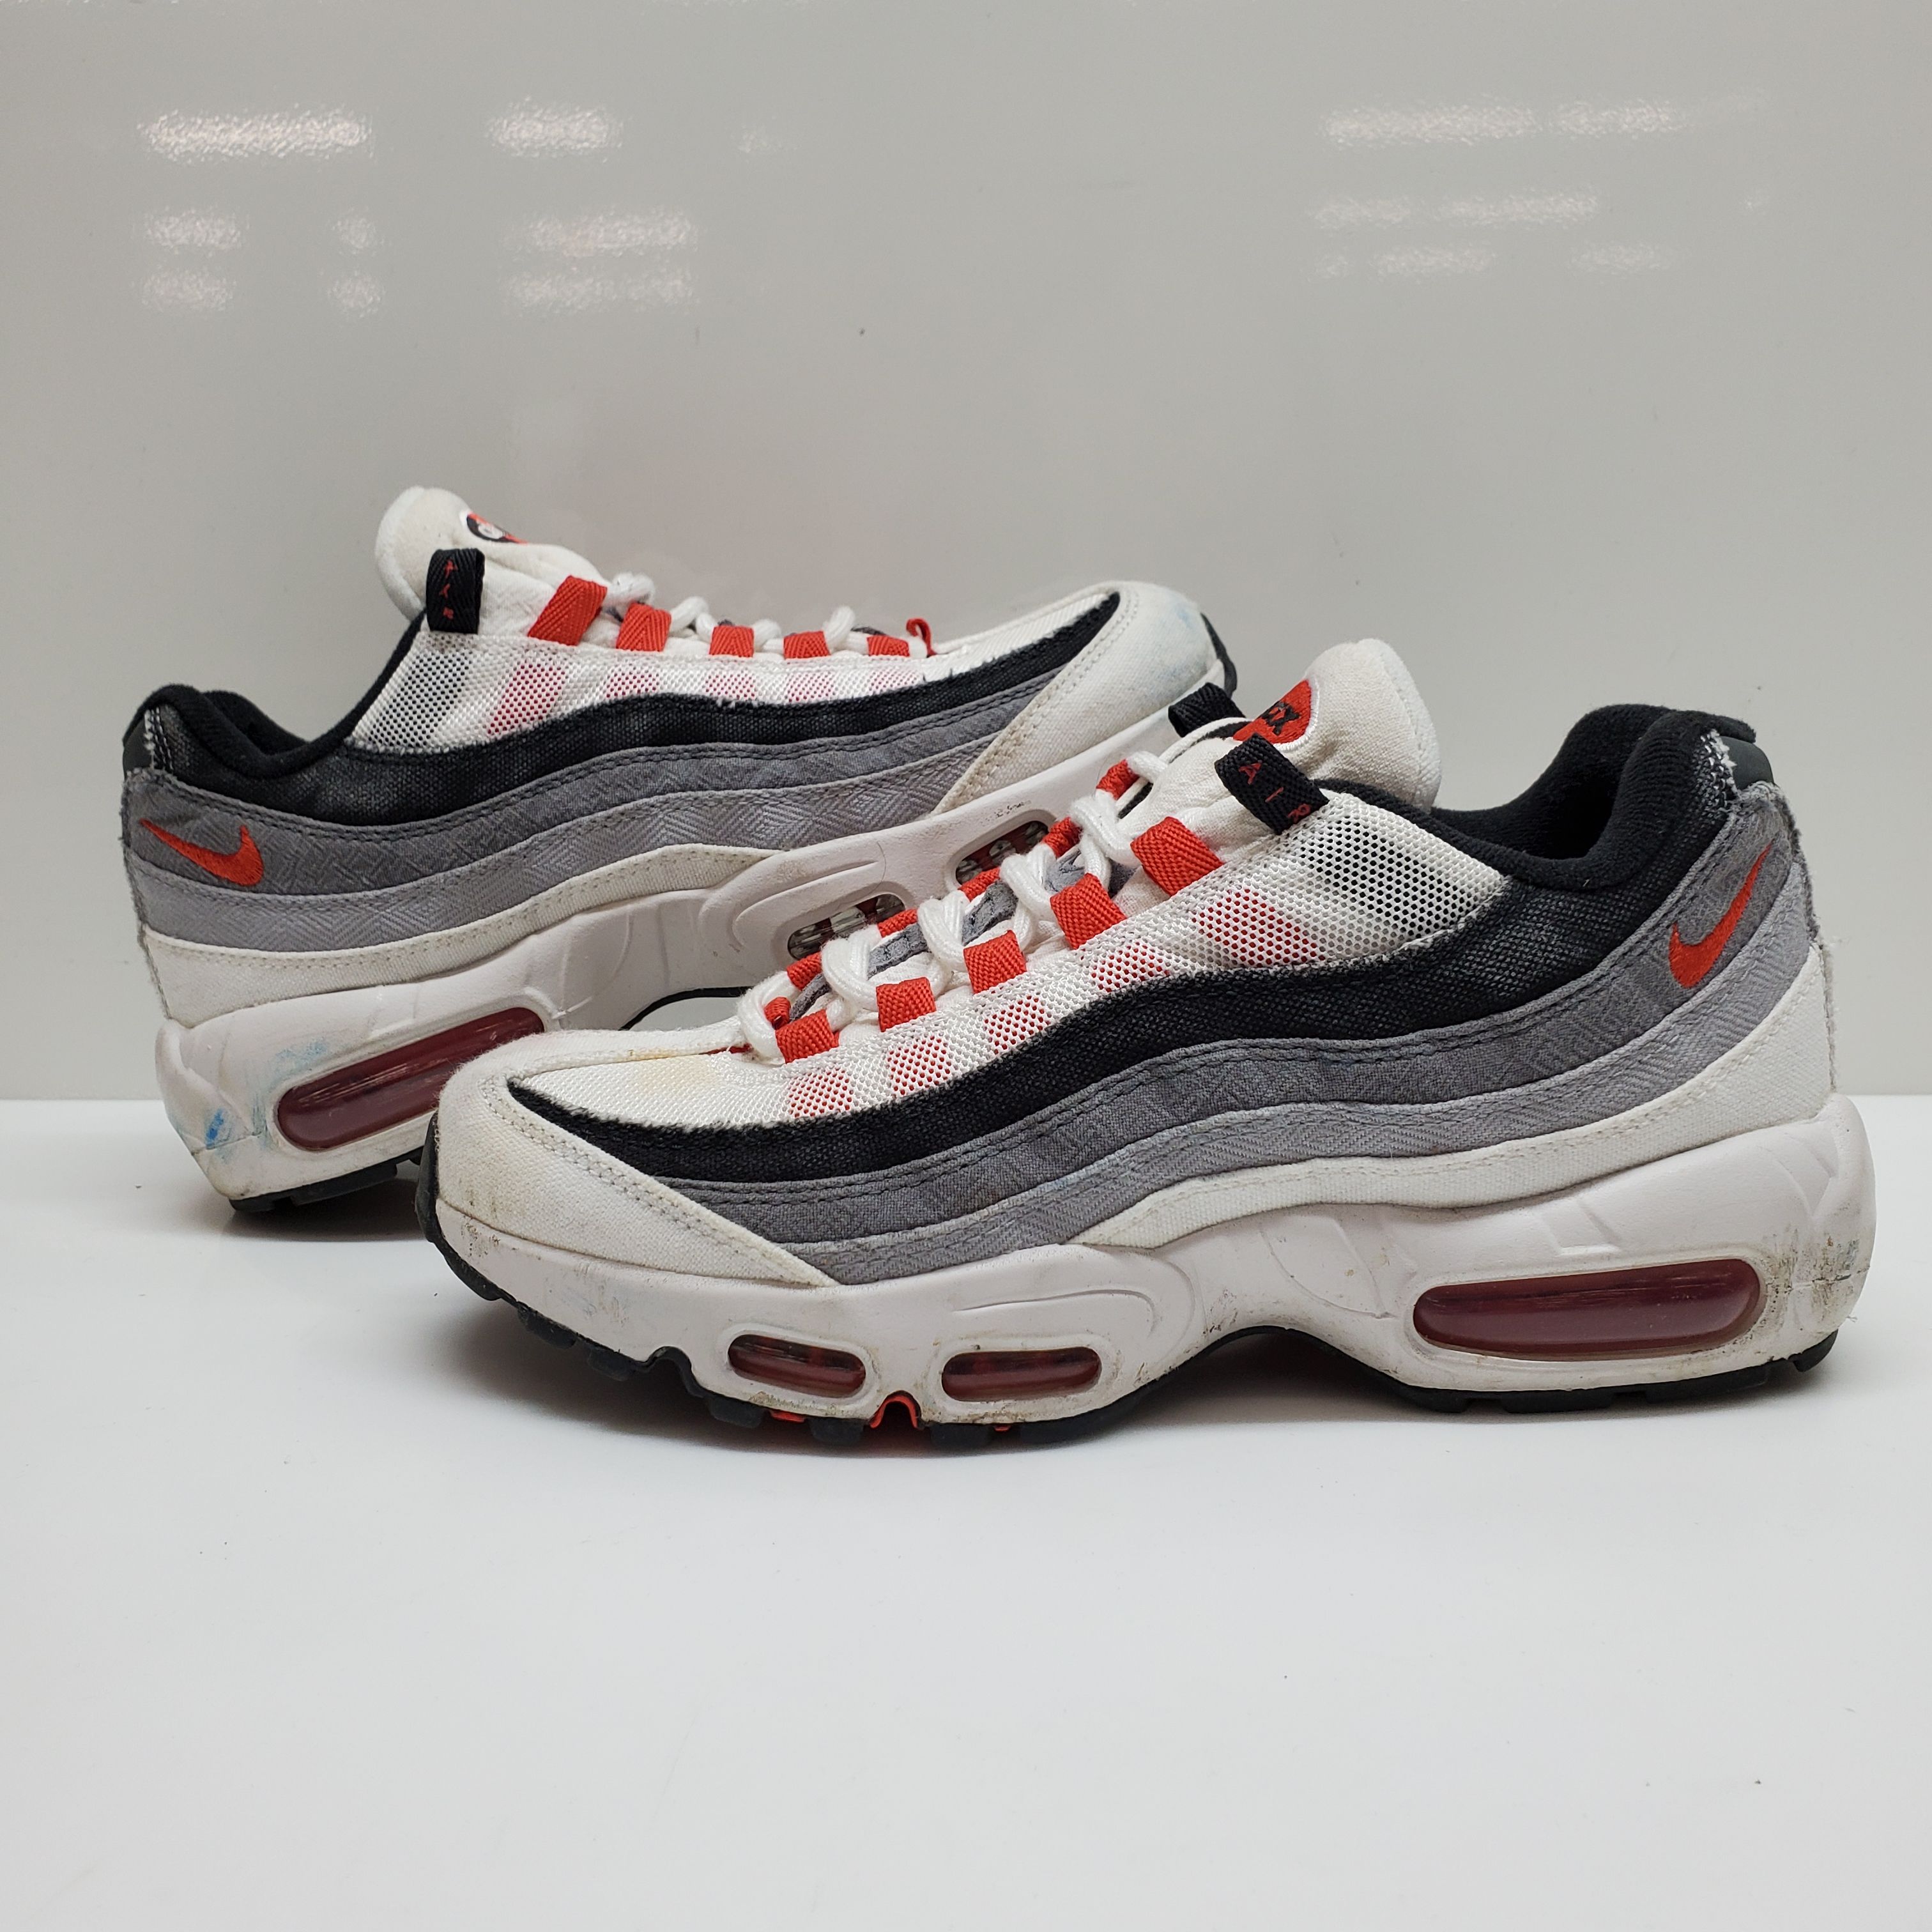 Buy 2021 MEN'S NIKE AIR MAX 95 QS 'JAPAN' DH9792-100 SIZE 7.5 for USD 44.99  | GoodwillFinds